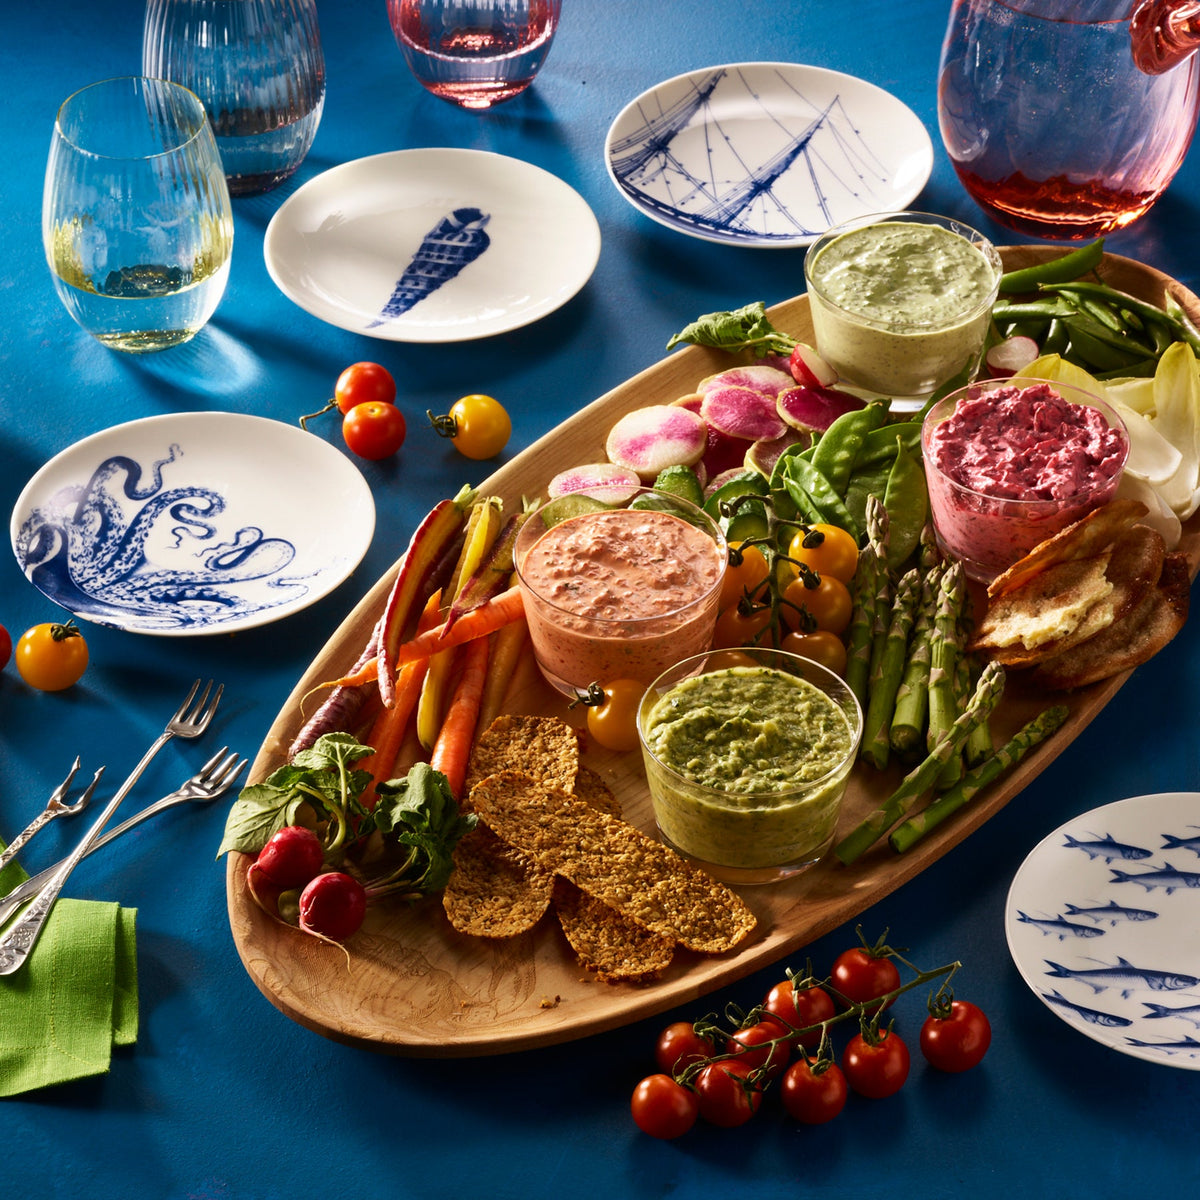 A wooden platter with colorful vegetable dips and fresh vegetables is surrounded by small, illustrated Caskata Artisanal Home Lucy Small Plates, glassware, and utensils on a blue surface.